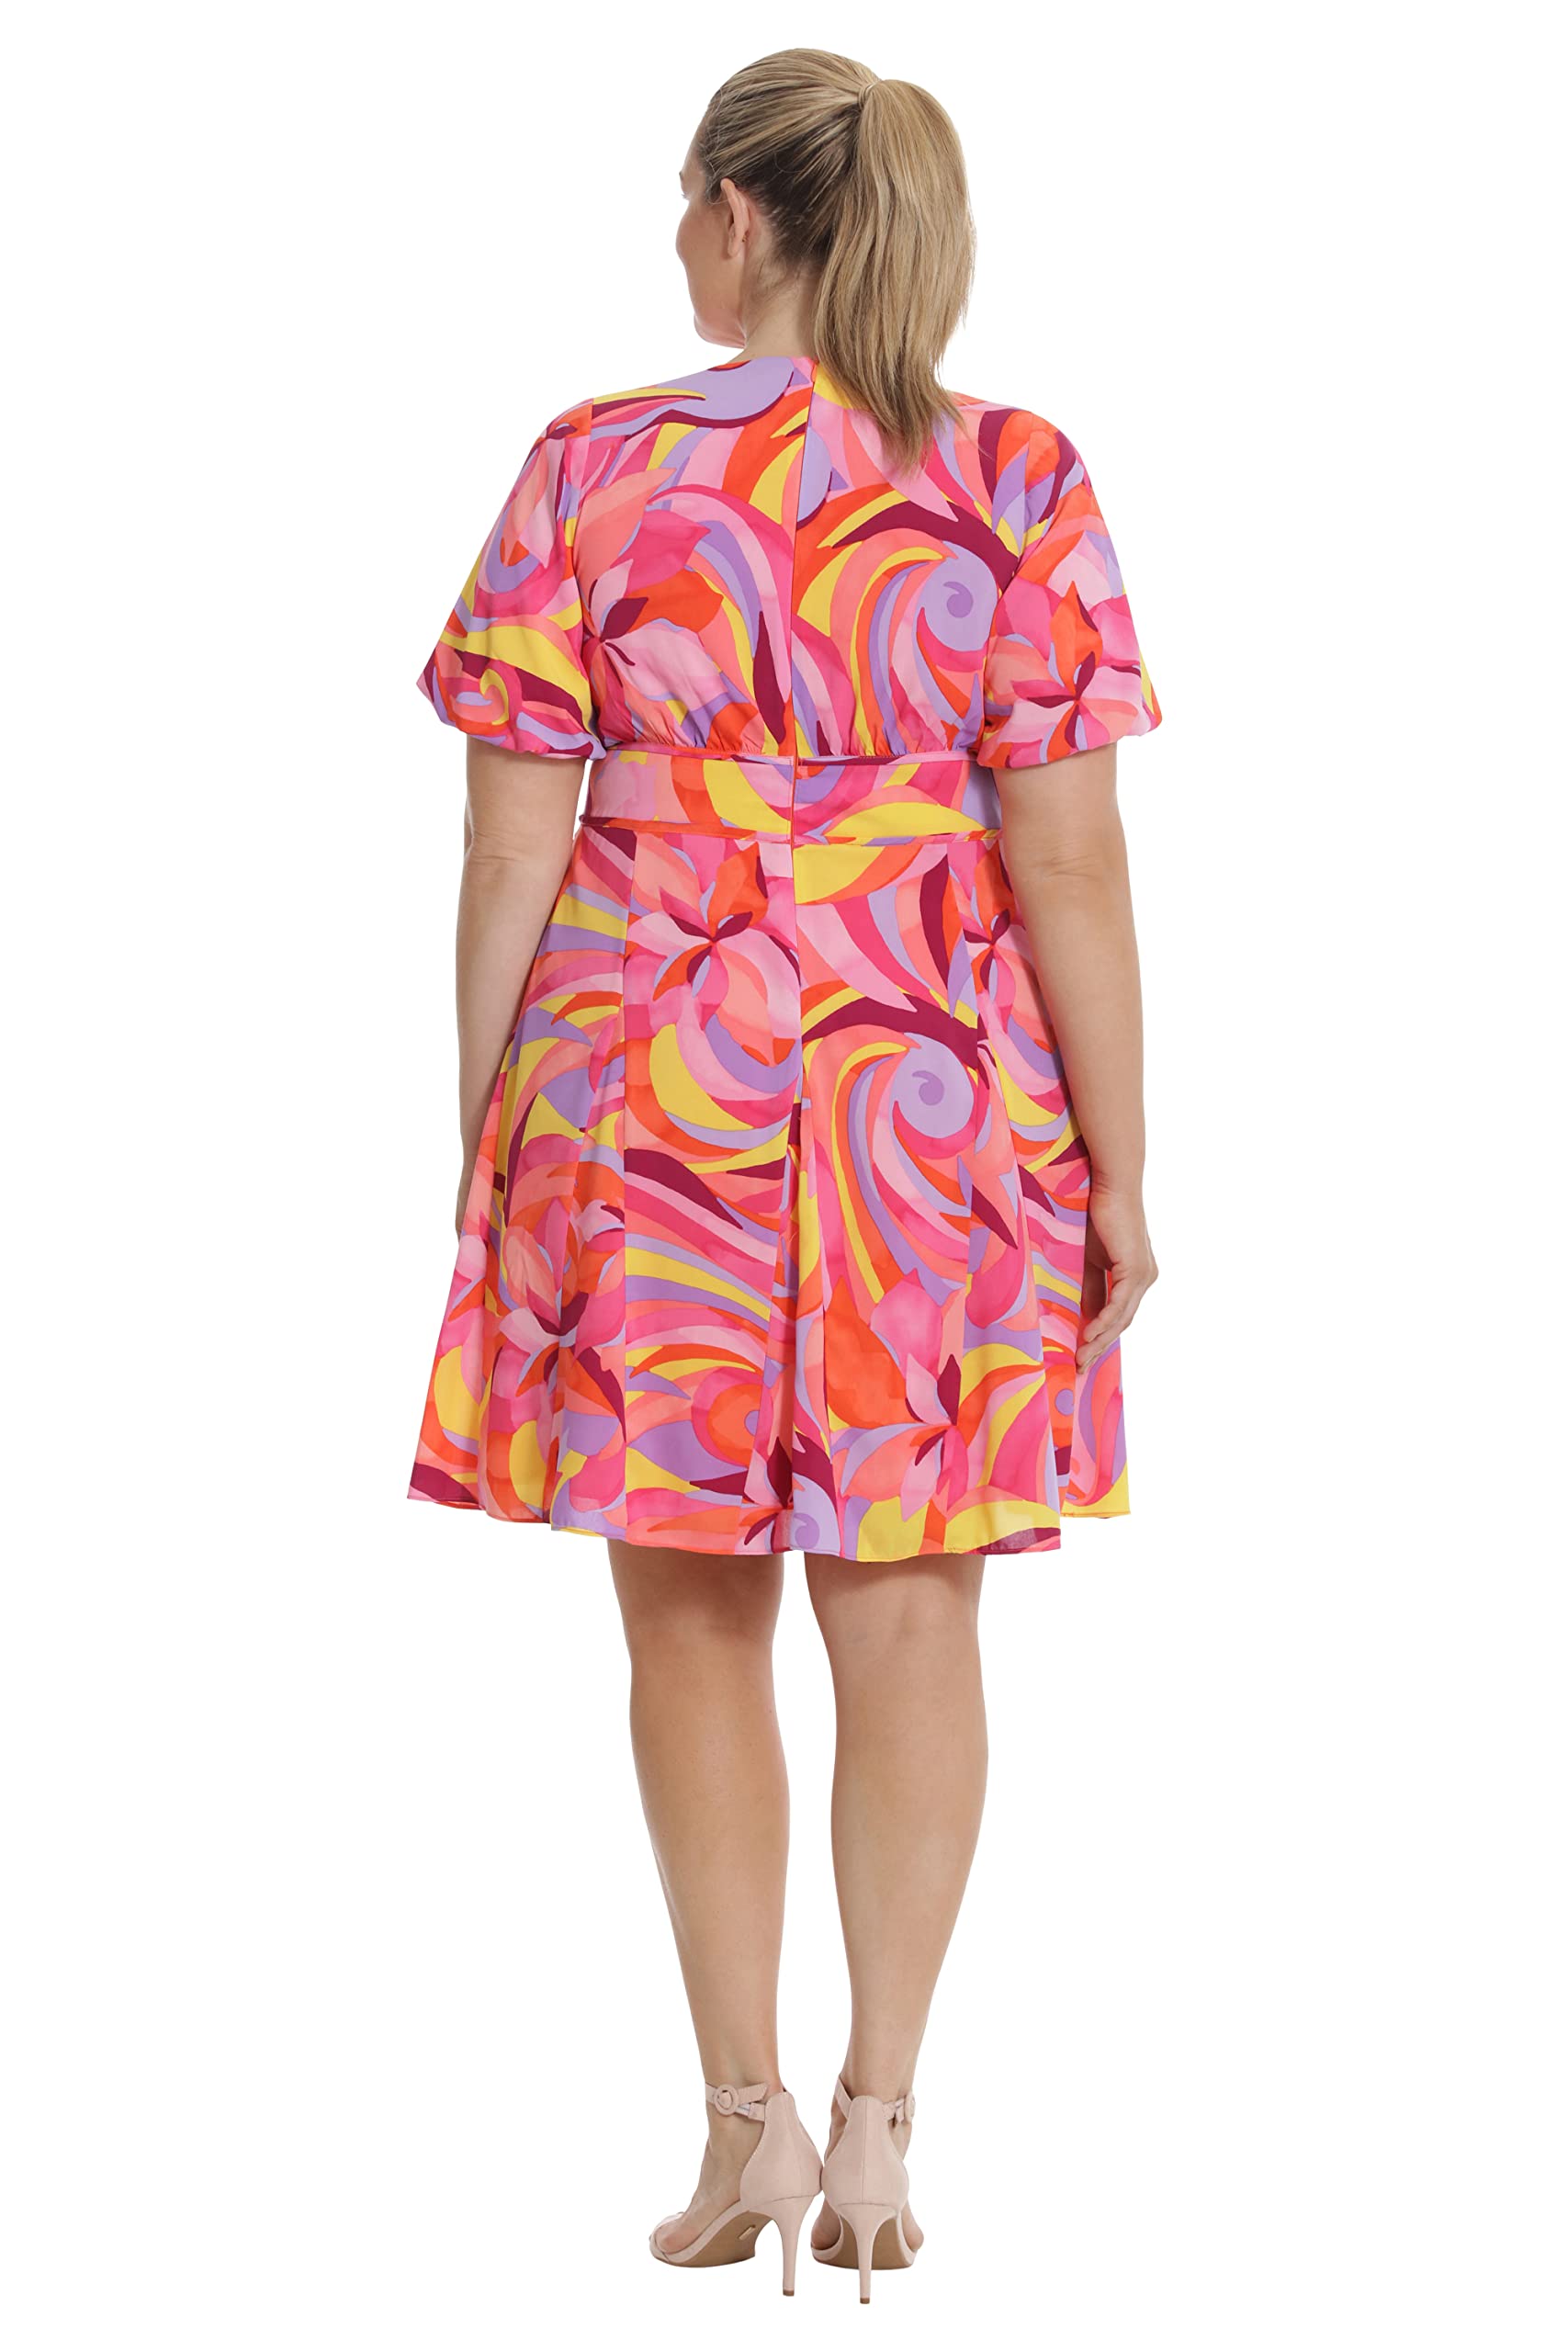 Donna Morgan Women's Fun Print Colorful Dress Dressy Casual Day Event Party Date